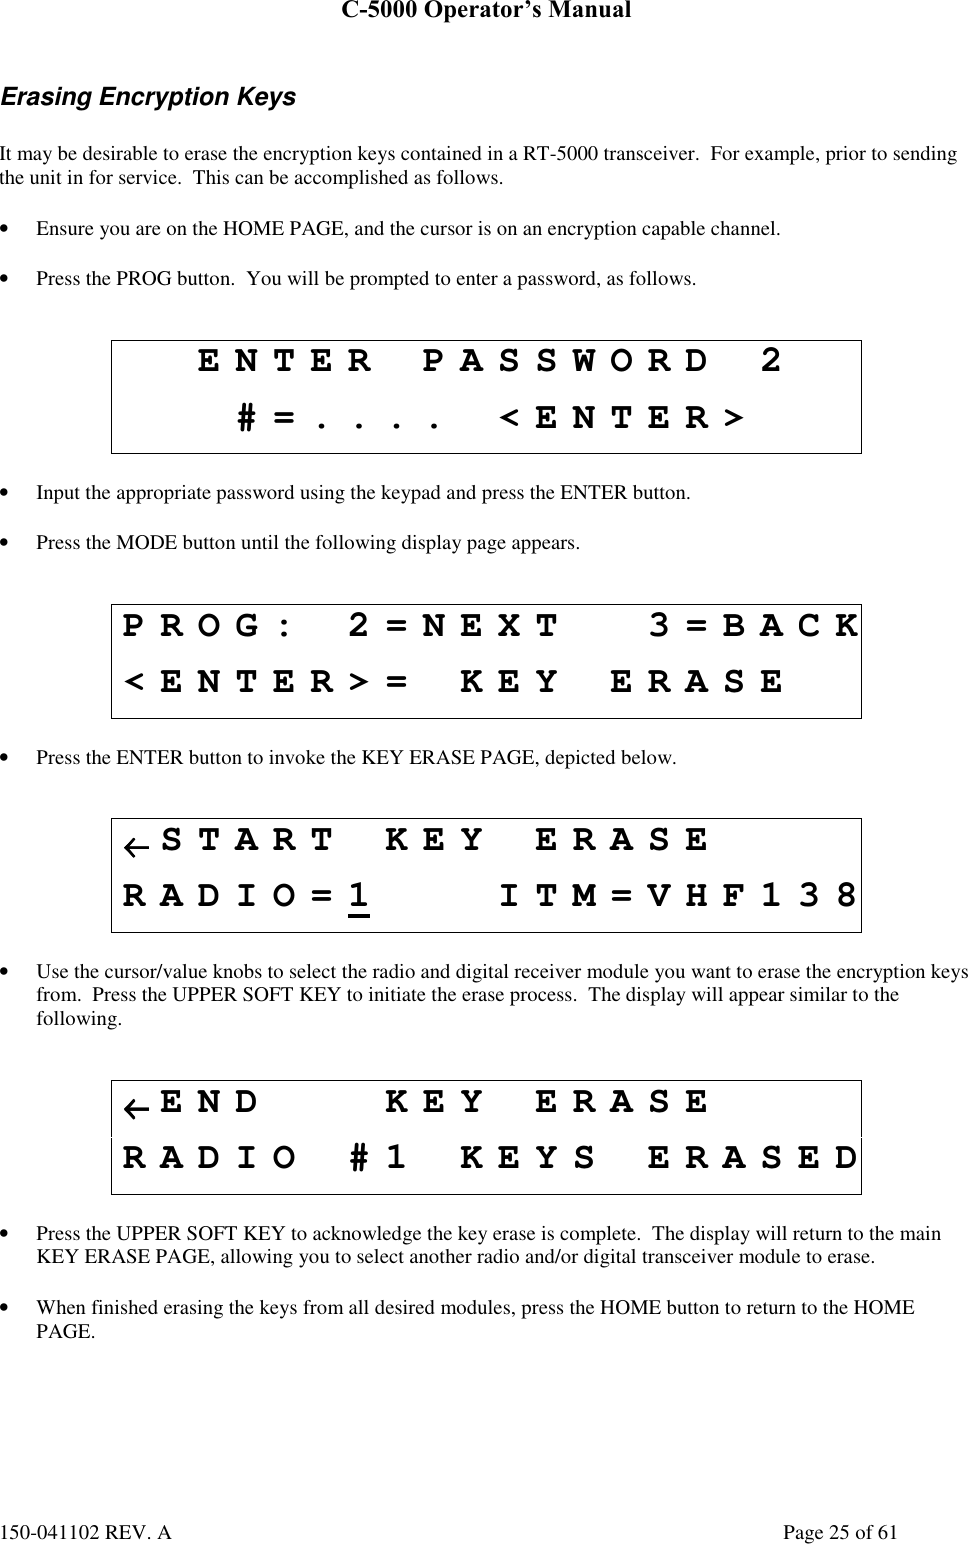 C-5000 Operator’s Manual150-041102 REV. A Page 25 of 61Erasing Encryption KeysIt may be desirable to erase the encryption keys contained in a RT-5000 transceiver.  For example, prior to sendingthe unit in for service.  This can be accomplished as follows.• Ensure you are on the HOME PAGE, and the cursor is on an encryption capable channel.• Press the PROG button.  You will be prompted to enter a password, as follows.ENTER PASSWORD 2#=.... &lt;ENTER&gt;• Input the appropriate password using the keypad and press the ENTER button.• Press the MODE button until the following display page appears.PROG: 2=NEXT 3=BACK&lt;ENTER&gt;= KEY ERASE• Press the ENTER button to invoke the KEY ERASE PAGE, depicted below.←←←←START KEY ERASERADIO=1 ITM=VHF138• Use the cursor/value knobs to select the radio and digital receiver module you want to erase the encryption keysfrom.  Press the UPPER SOFT KEY to initiate the erase process.  The display will appear similar to thefollowing.←←←←END KEY ERASERADIO #1 KEYS ERASED• Press the UPPER SOFT KEY to acknowledge the key erase is complete.  The display will return to the mainKEY ERASE PAGE, allowing you to select another radio and/or digital transceiver module to erase.• When finished erasing the keys from all desired modules, press the HOME button to return to the HOMEPAGE.